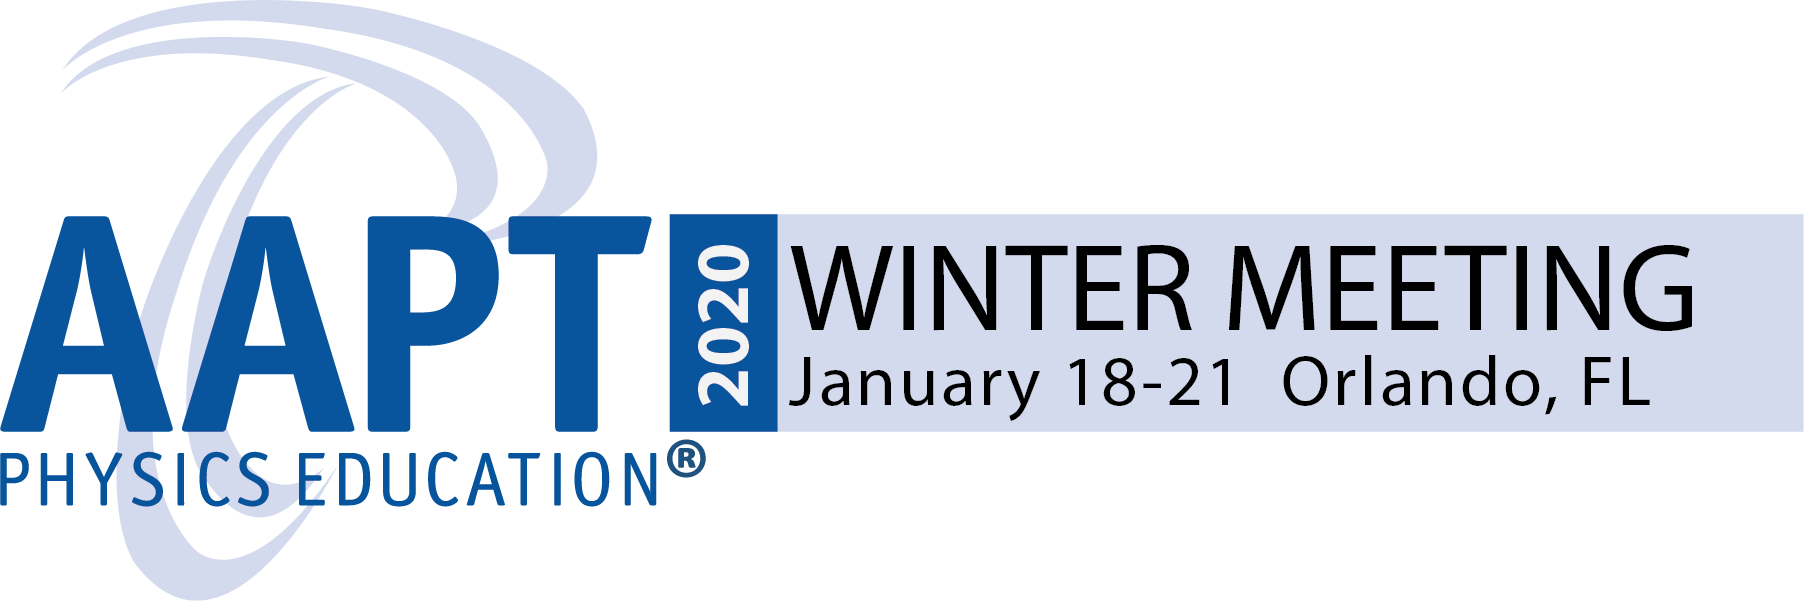 2020 Winter Meeting Program Sessions For Wm2020